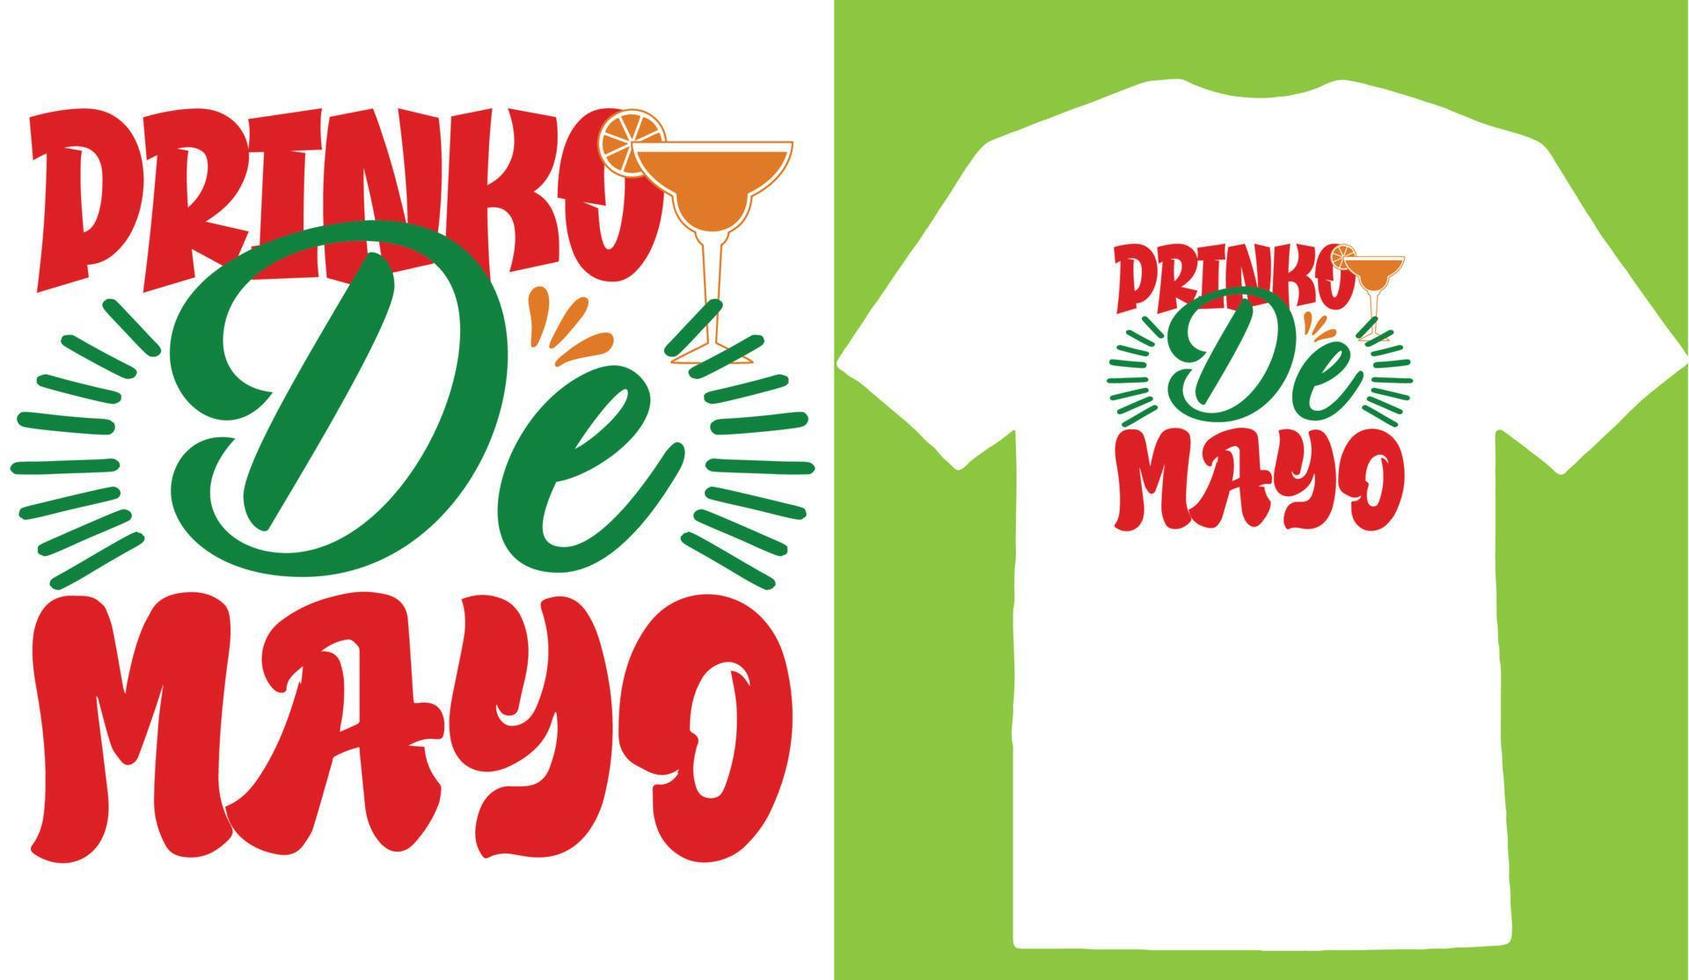 Blessed And Taco Obsessed Cinco De T-Shirt Design vector